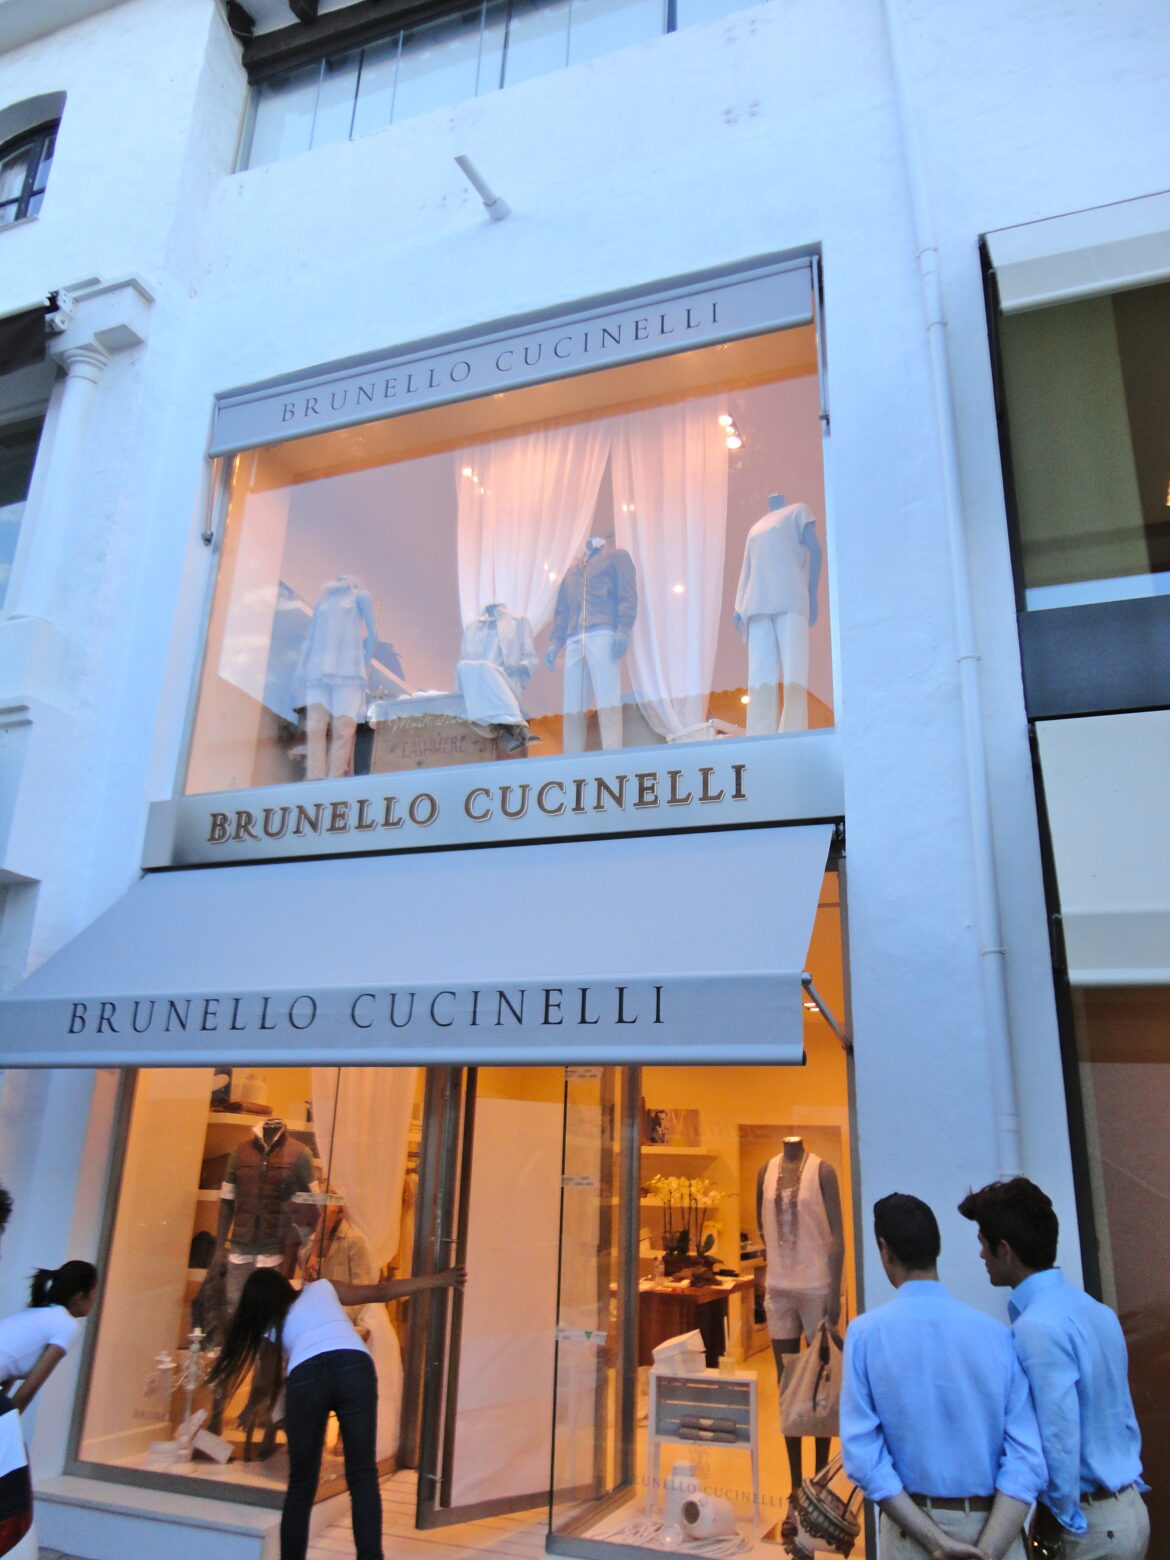 BRUNELLO CUCINELLI OPENS ITS FIRST MONOBRAND STORE IN THE UNITED ARAB  EMIRATES